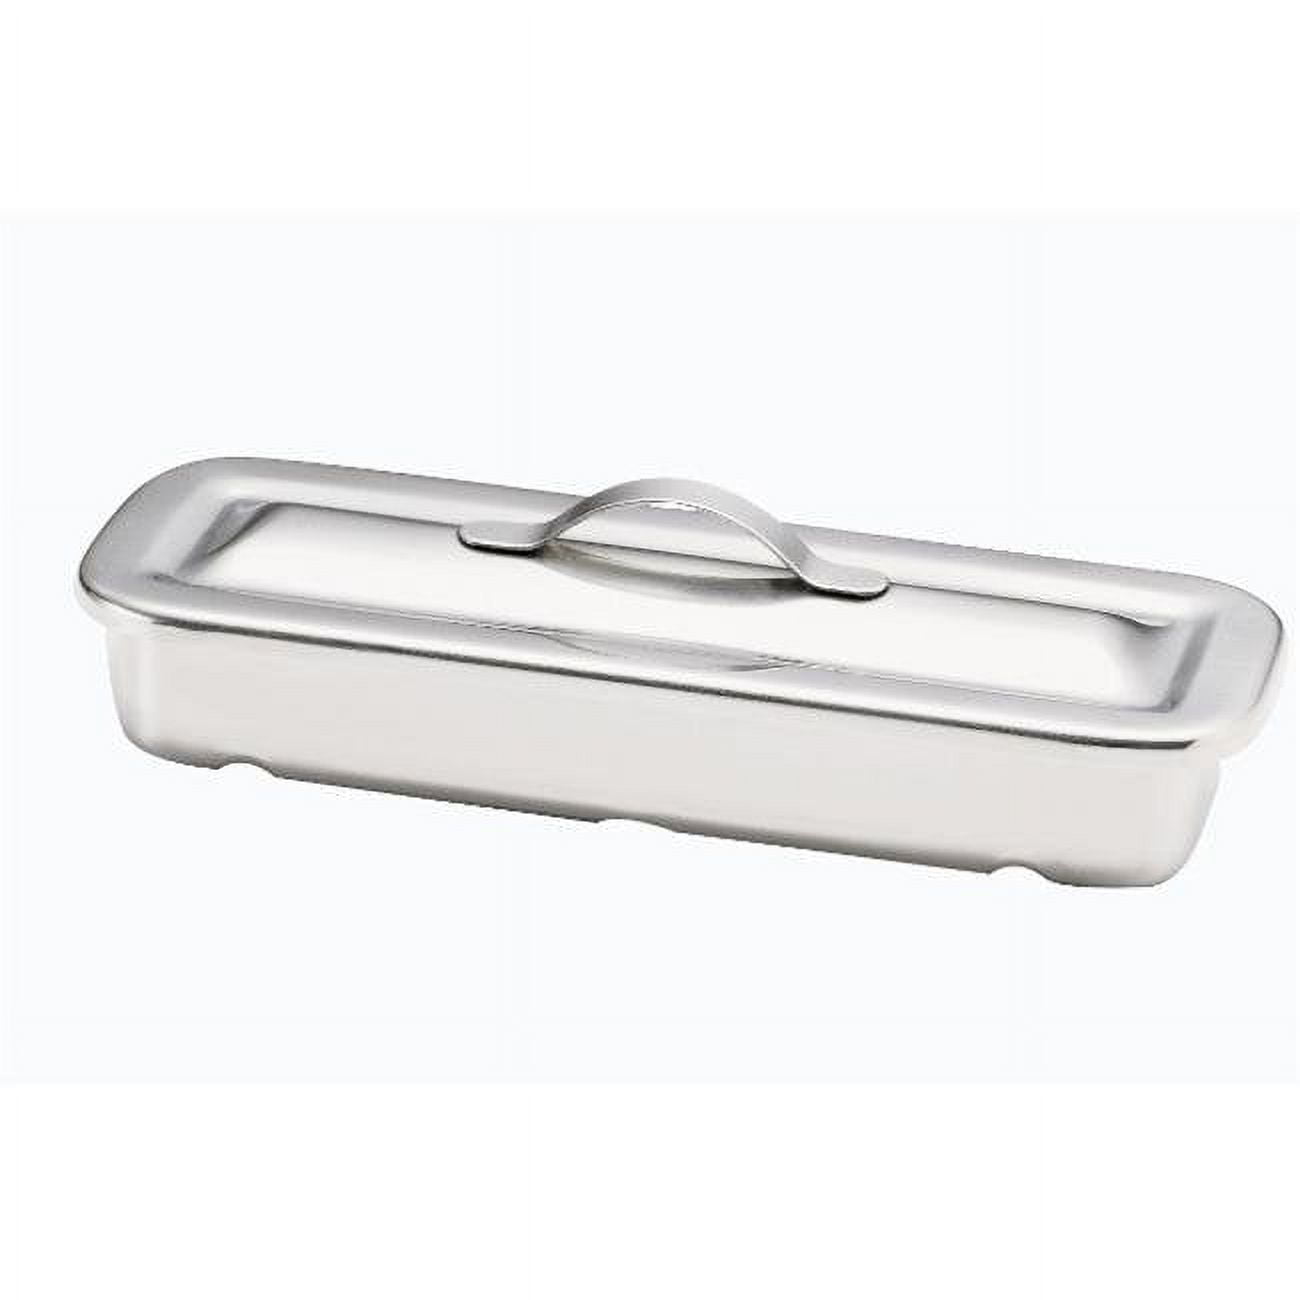 4254 8.5 X 3 X 1.5 In. Stainless Steel Instrument Tray With Strap Handle